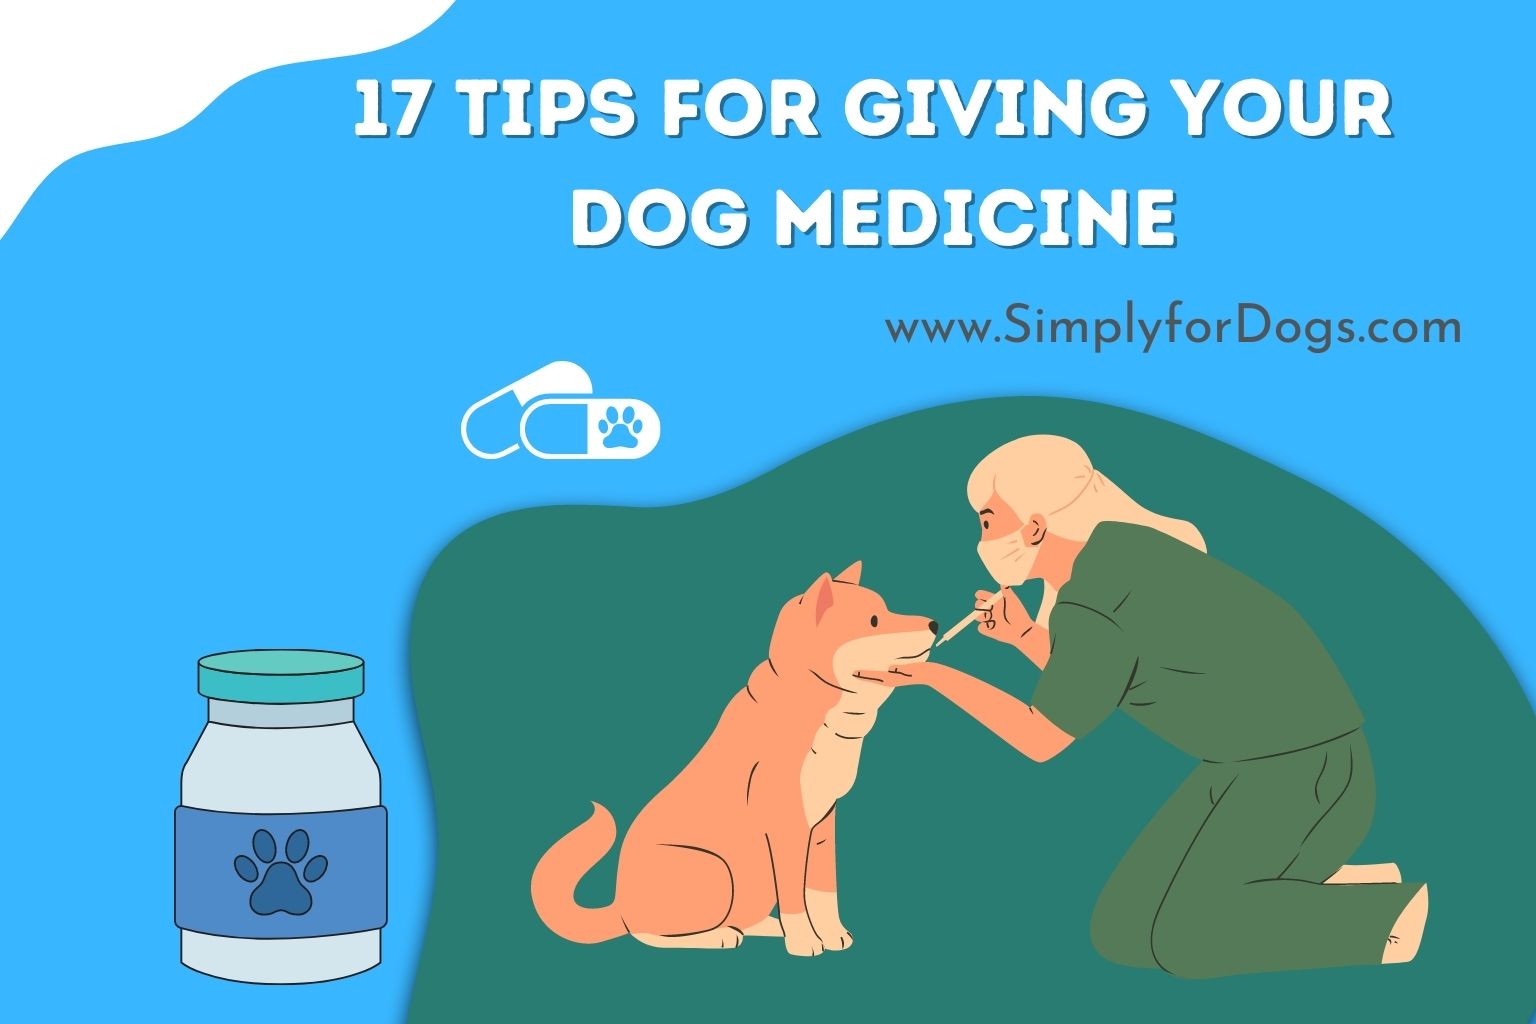 17 Tips for Giving Your Dog Medicine